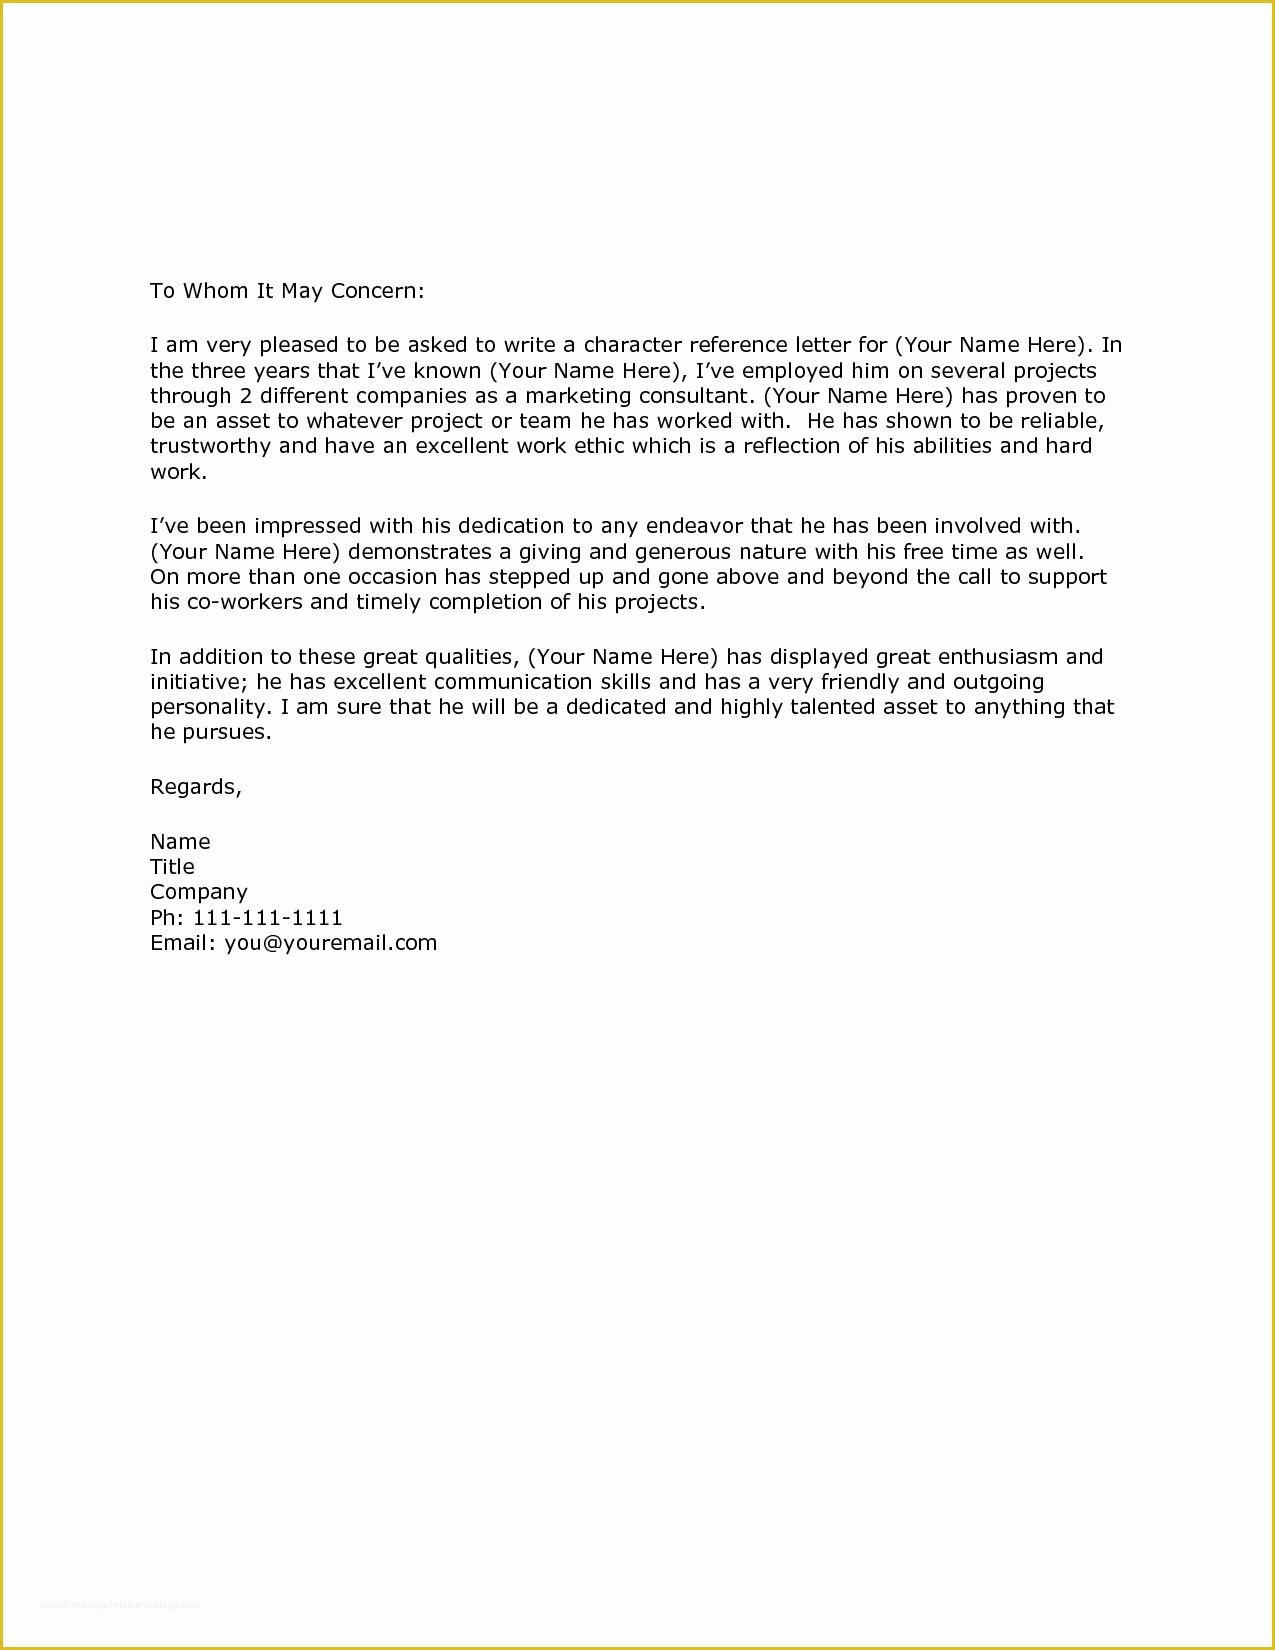 Free Printable Letter Of Recommendation Template Of Character Reference Letter Template